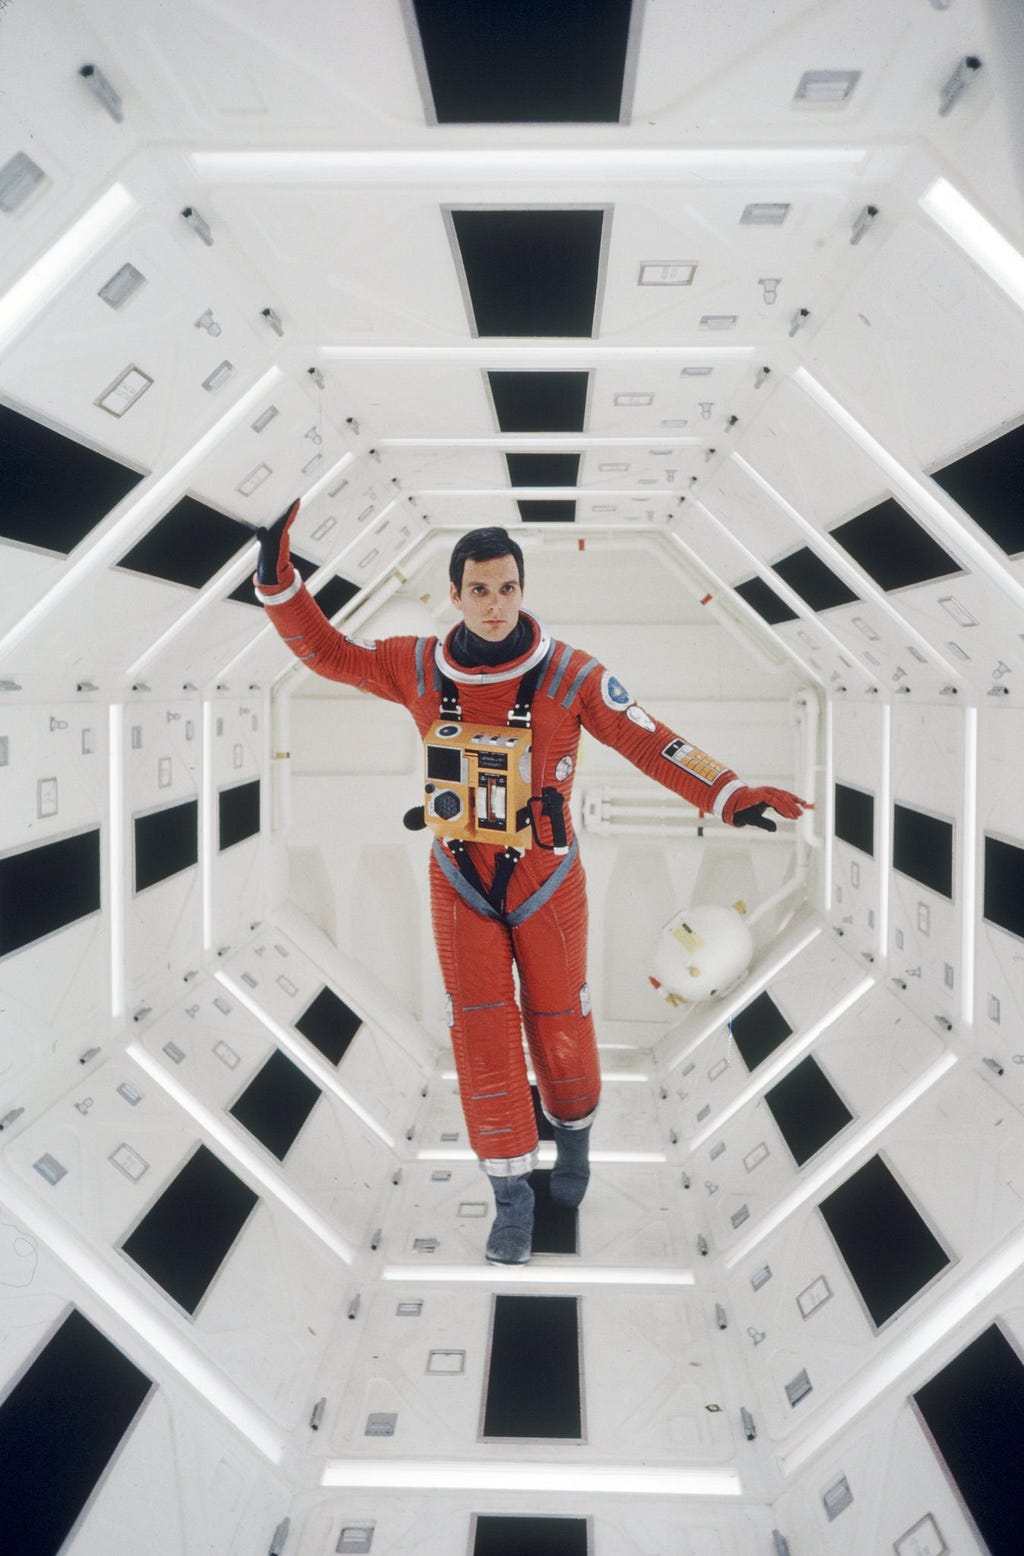 A picture from the movie 2001: A Space Odyssey. A astronaut floats in a futuristic white corridor while on a spaceship.